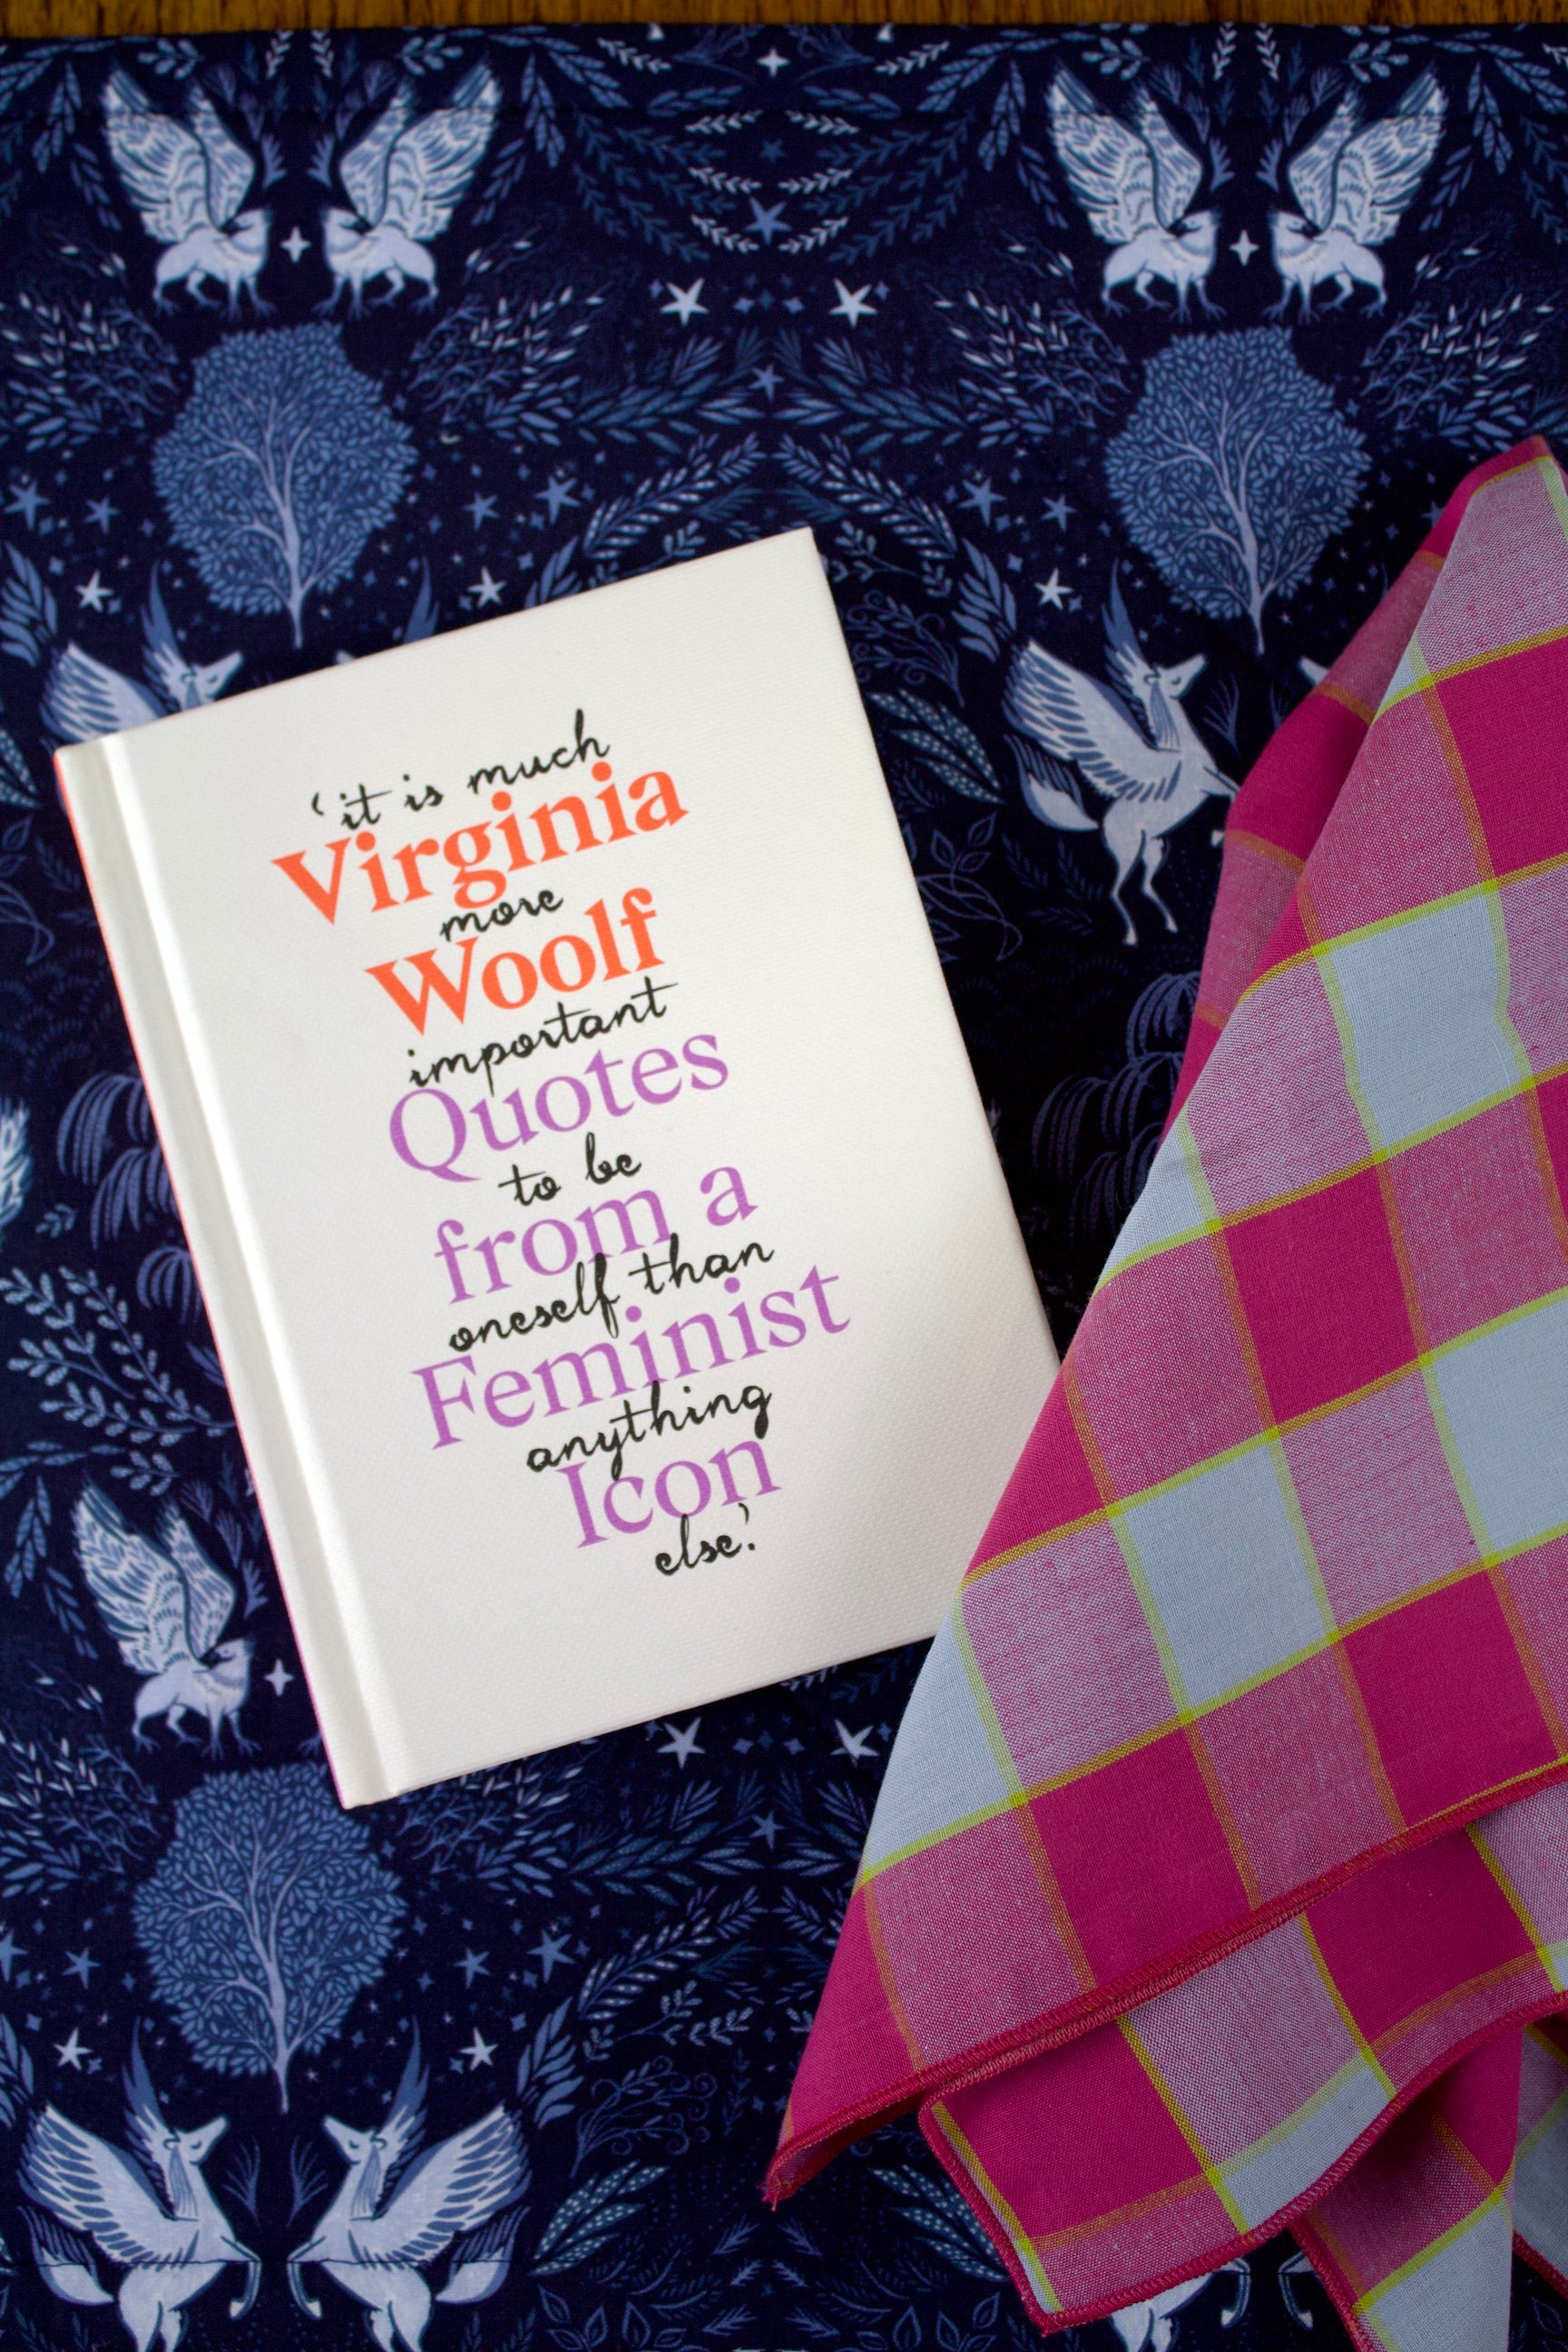 Virginia Woolf: Inspiring Quotes from an Original Feminist Icon